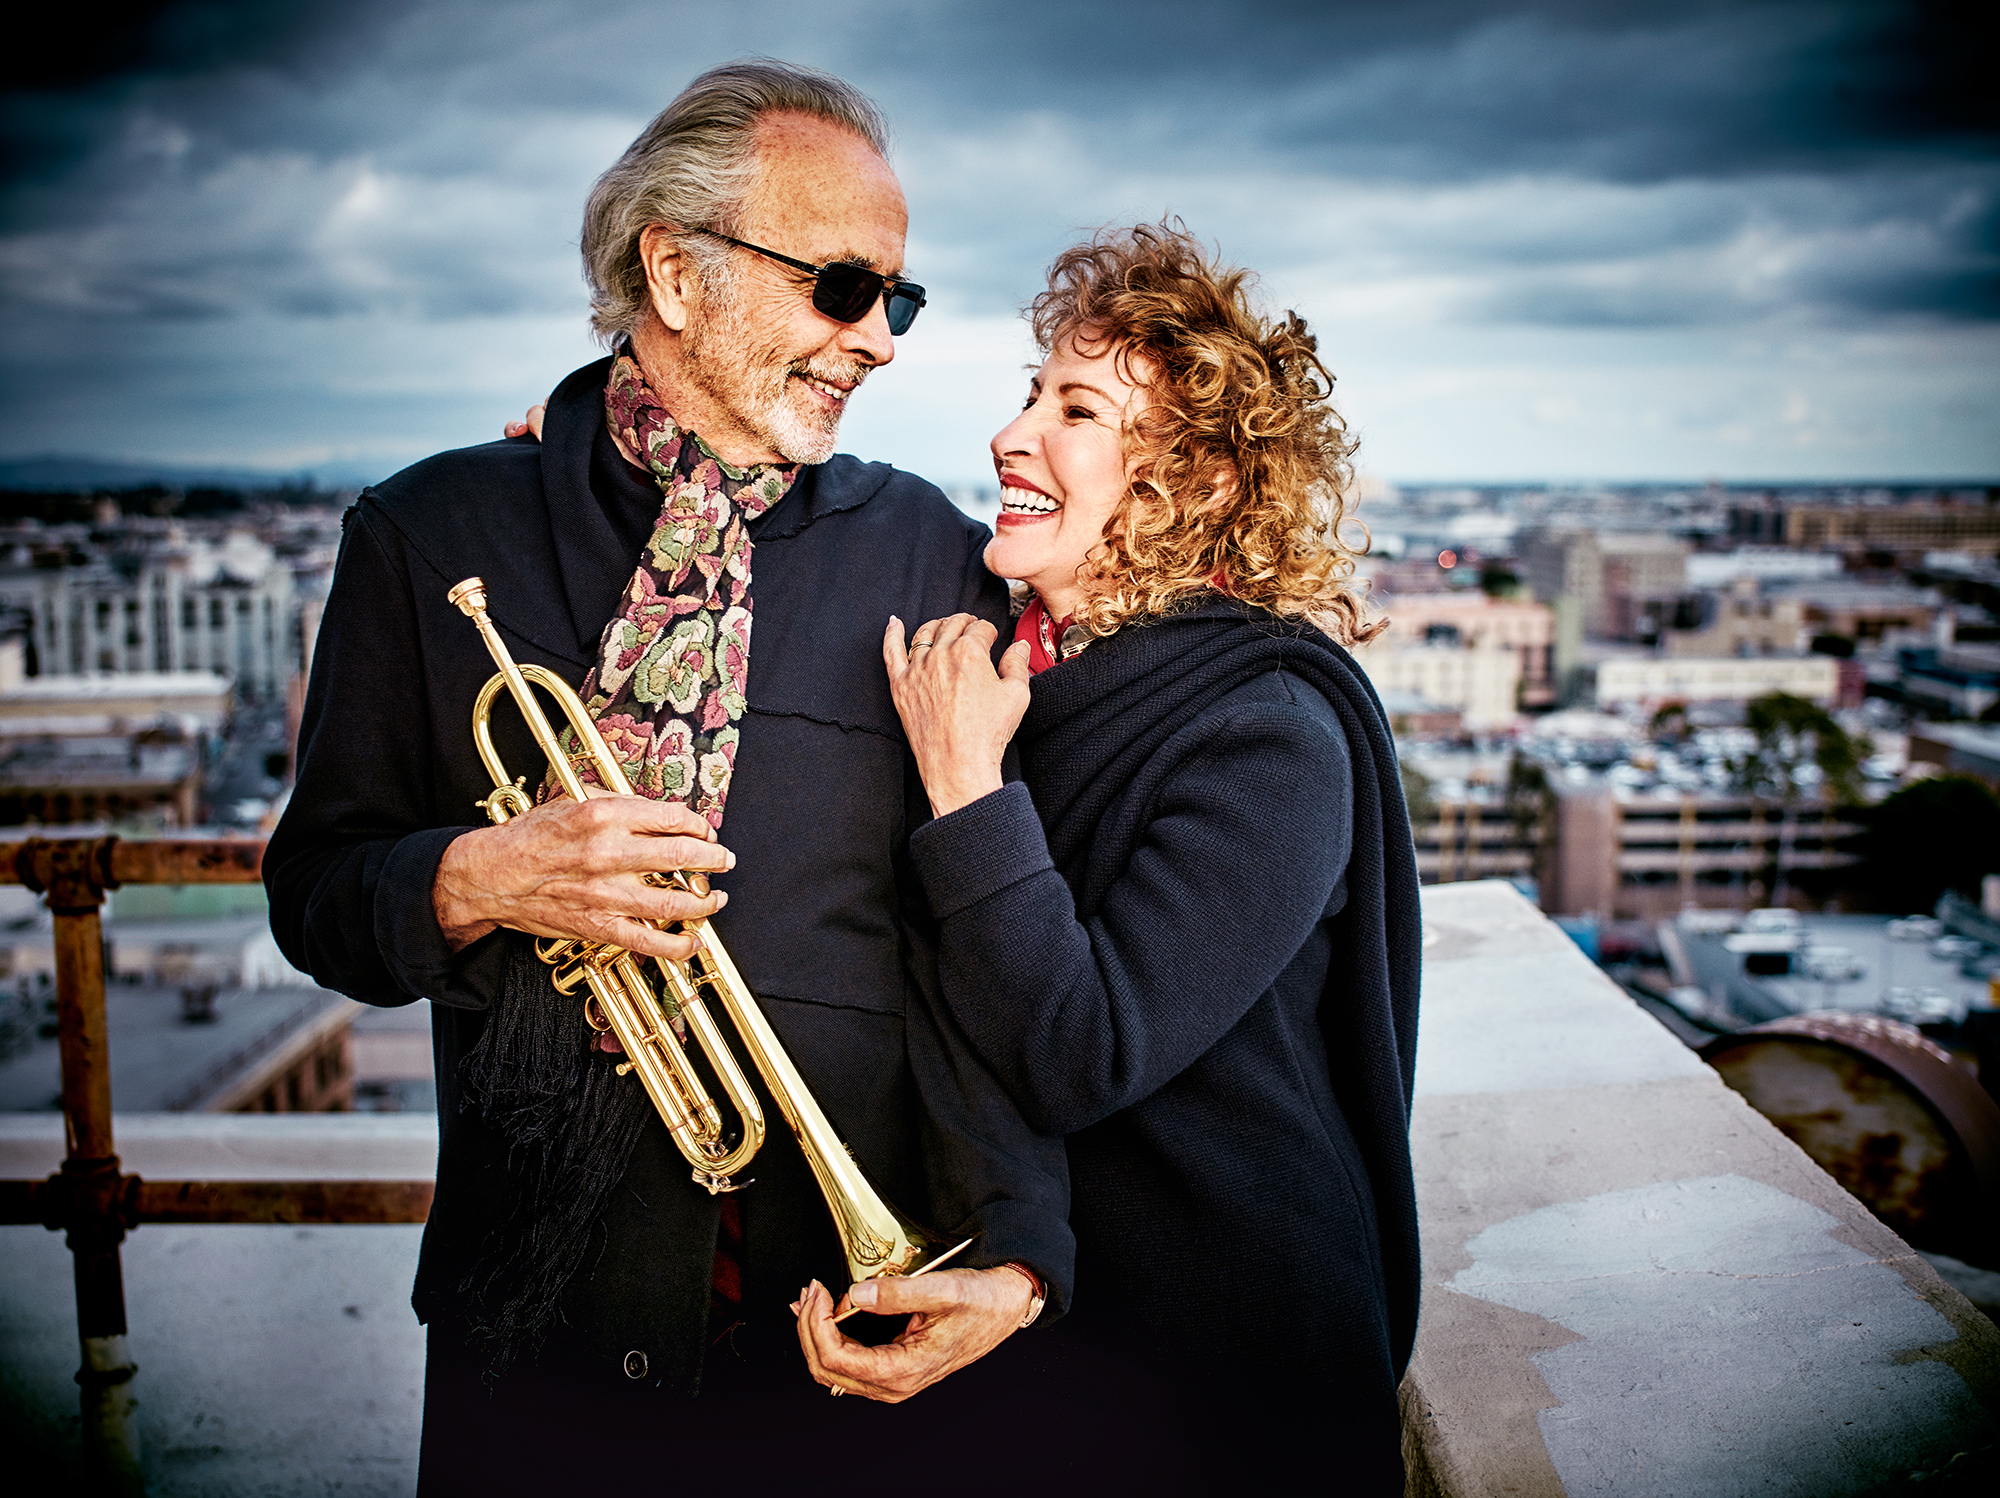 Herb Alpert marks 60 years of making music with wife Lani Hall